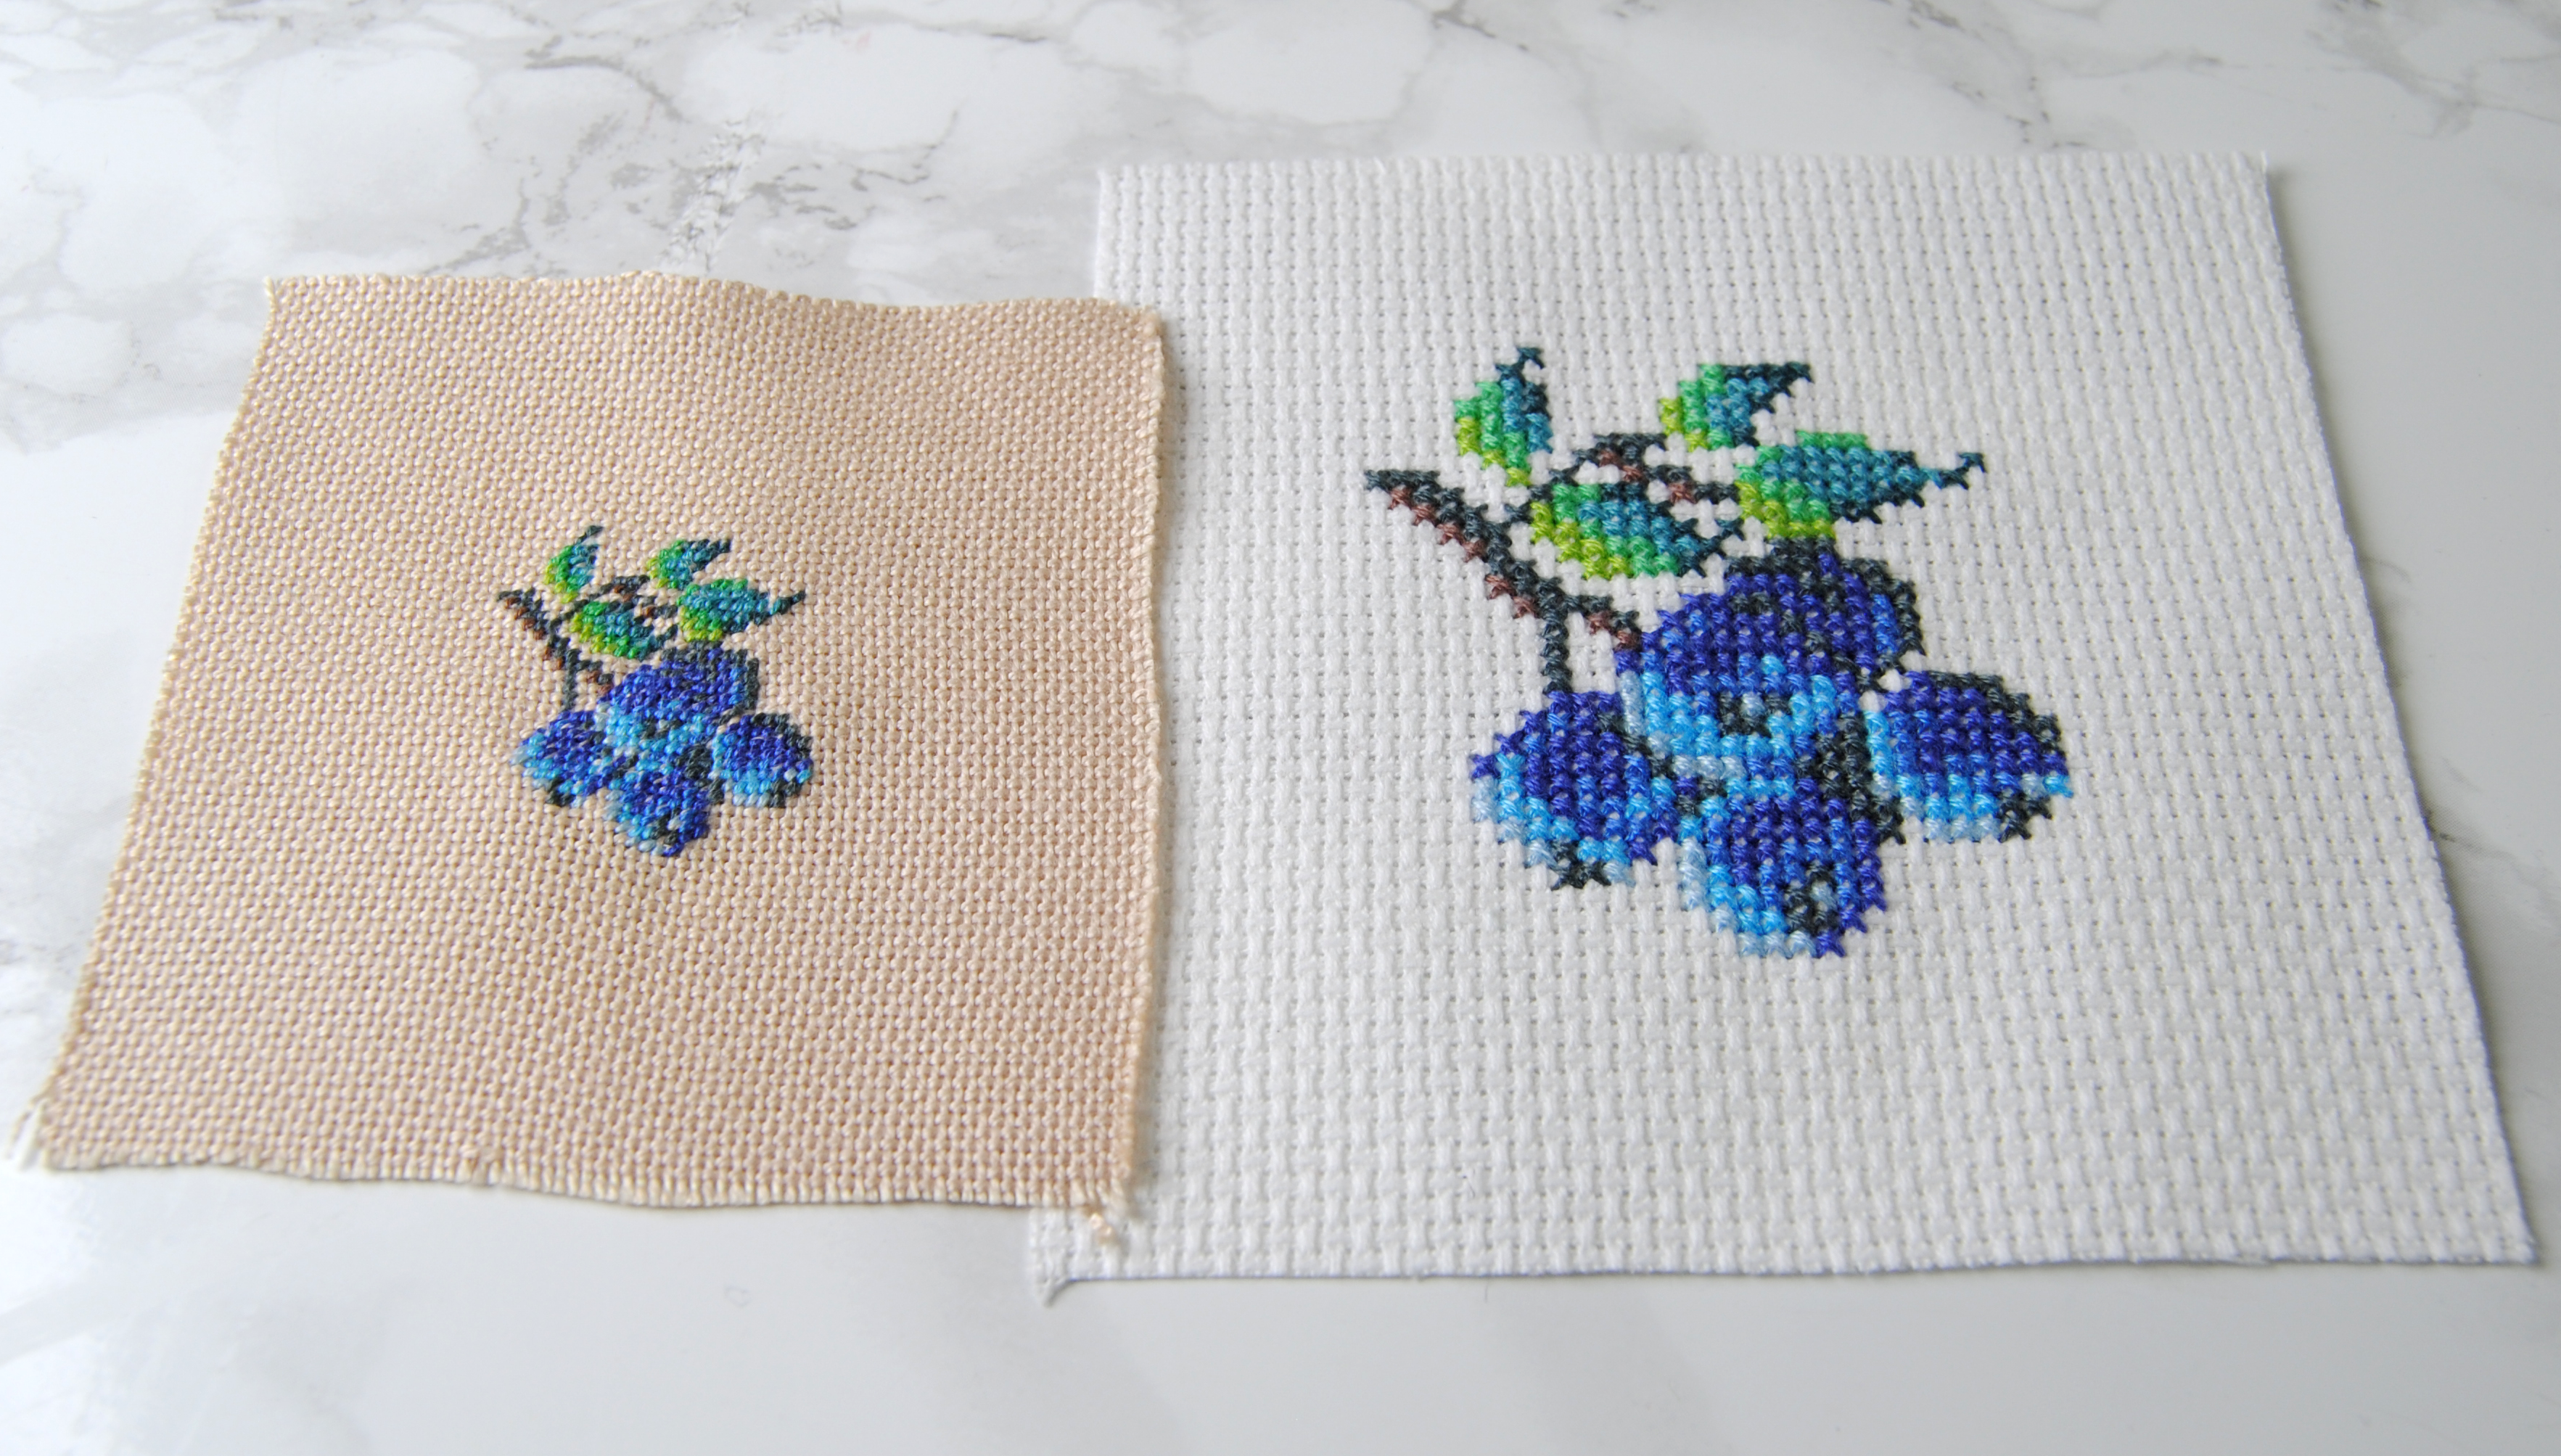 Petit Point - Similar But Different to Cross Stitch and Smaller! ⋆